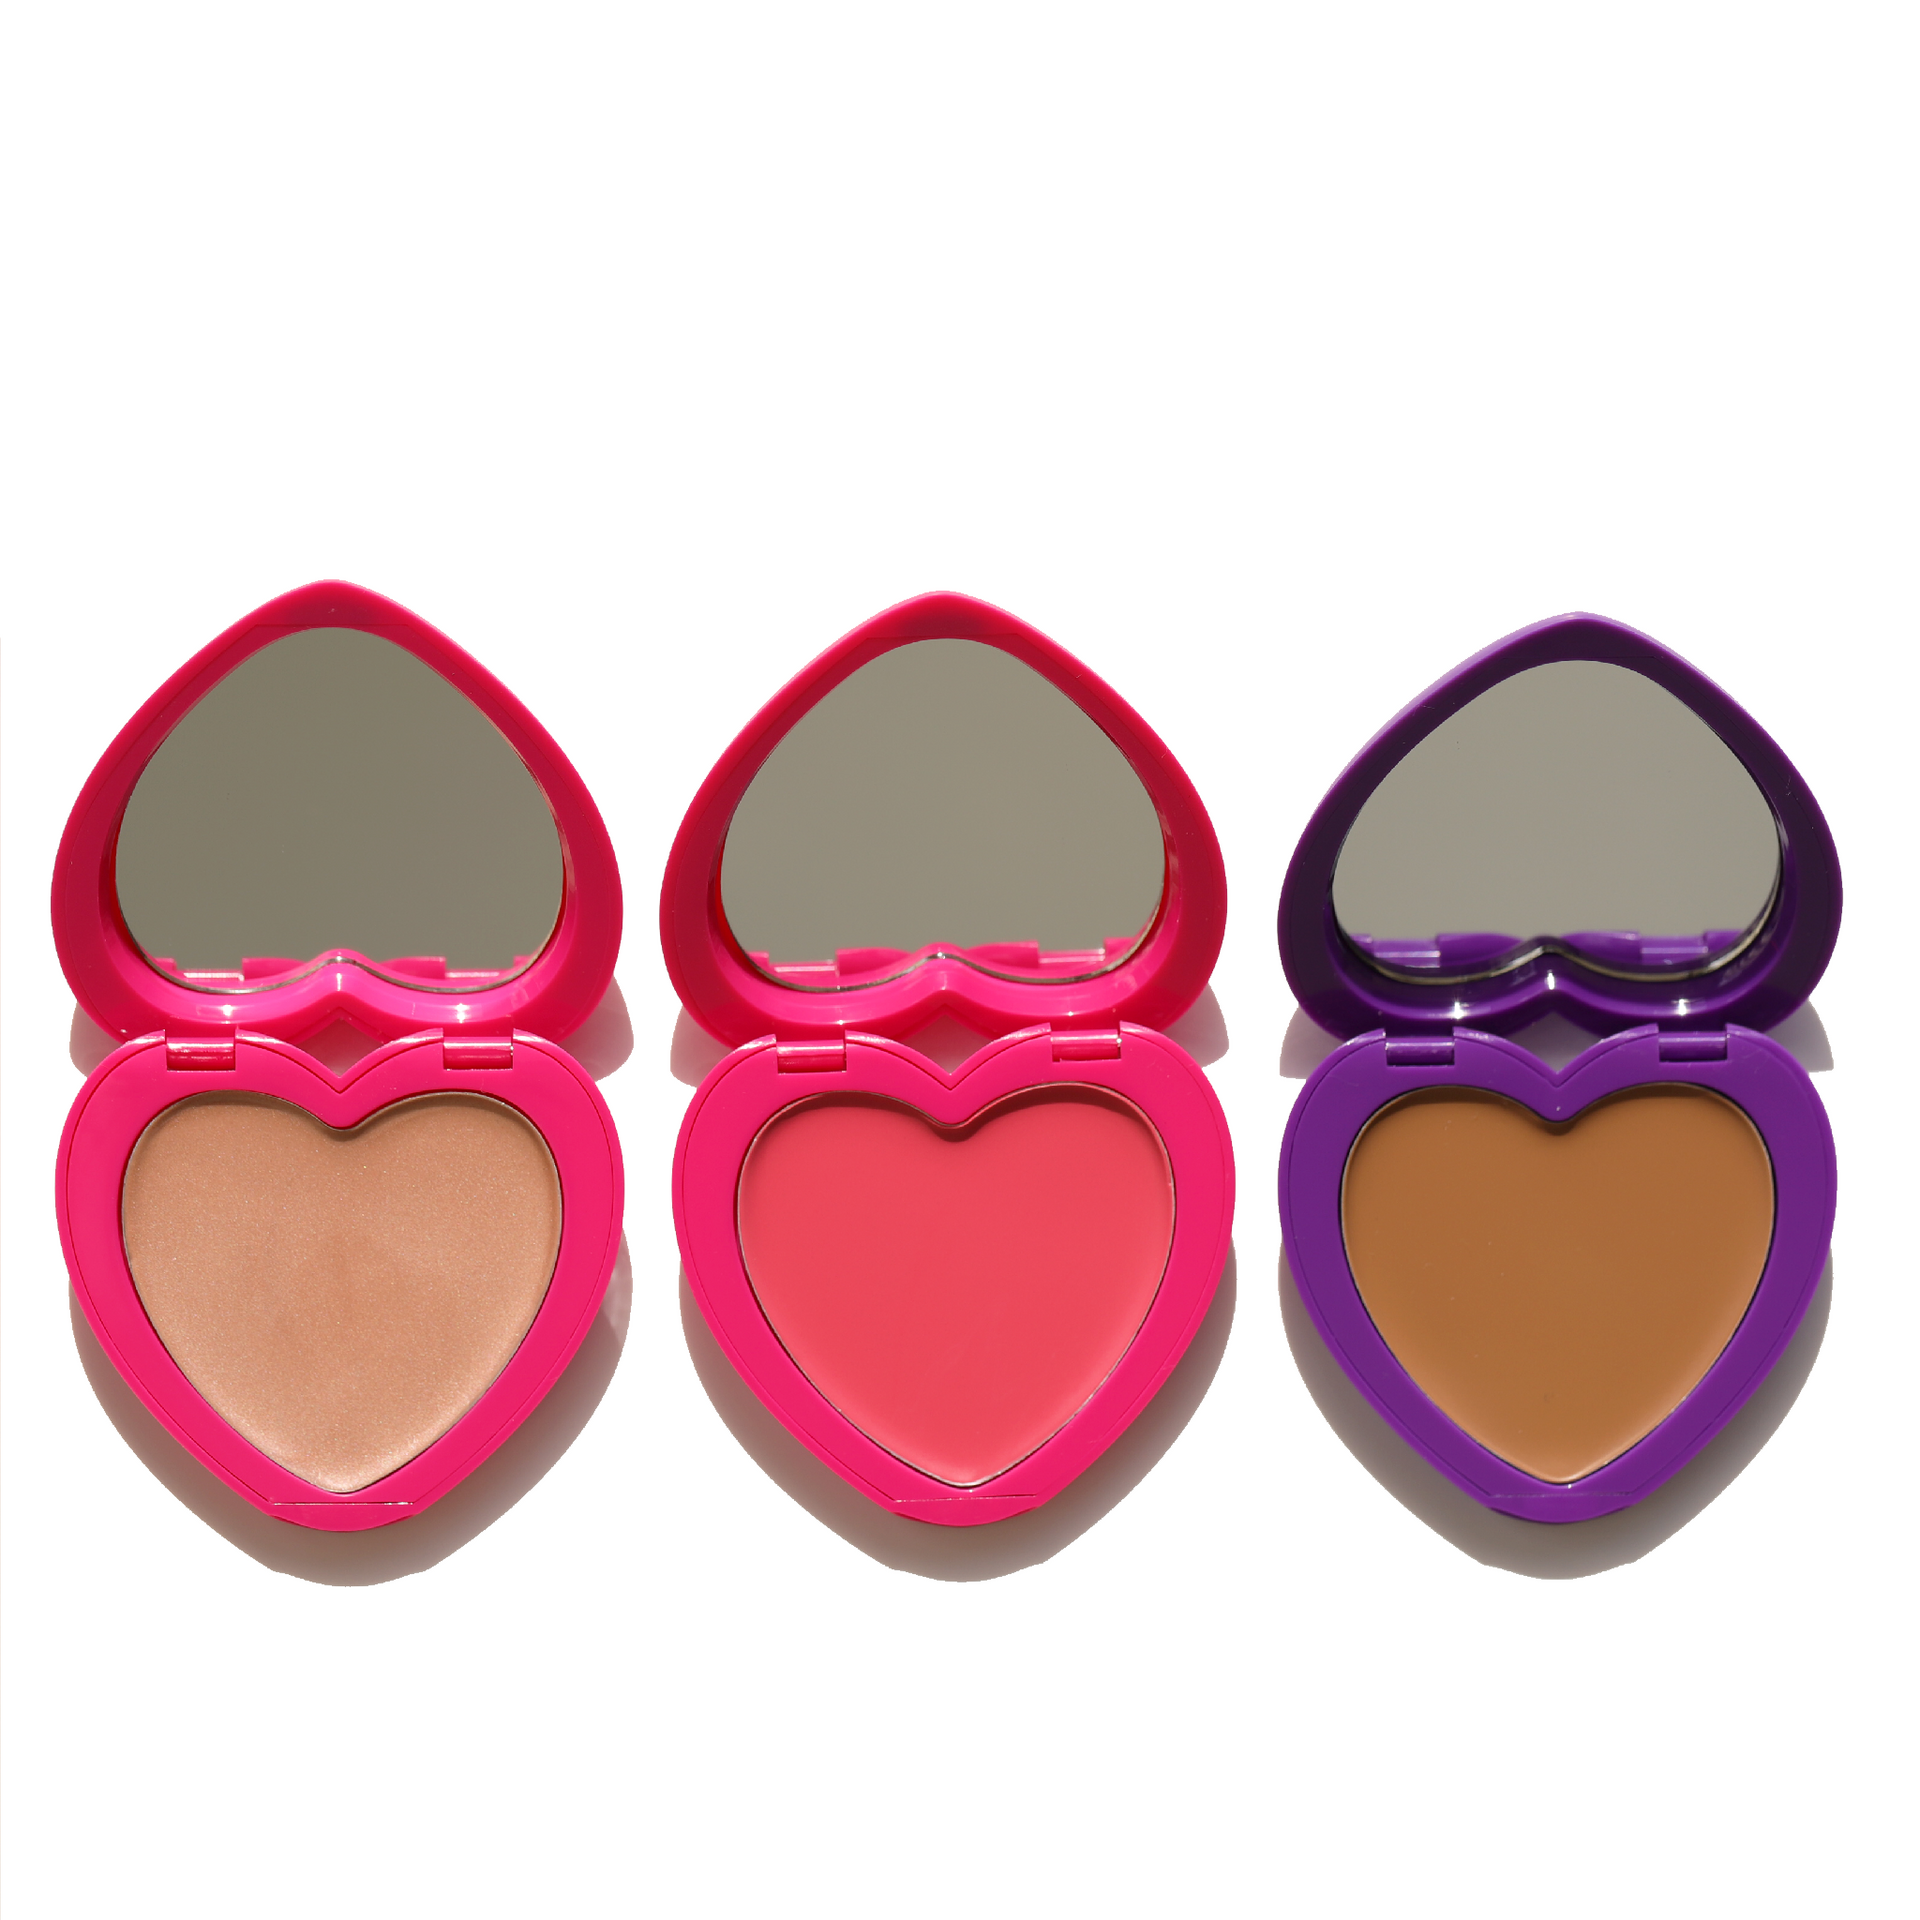 open pink and purple heart-shaped compact with mirror candy paint trifecta - half caked makeup